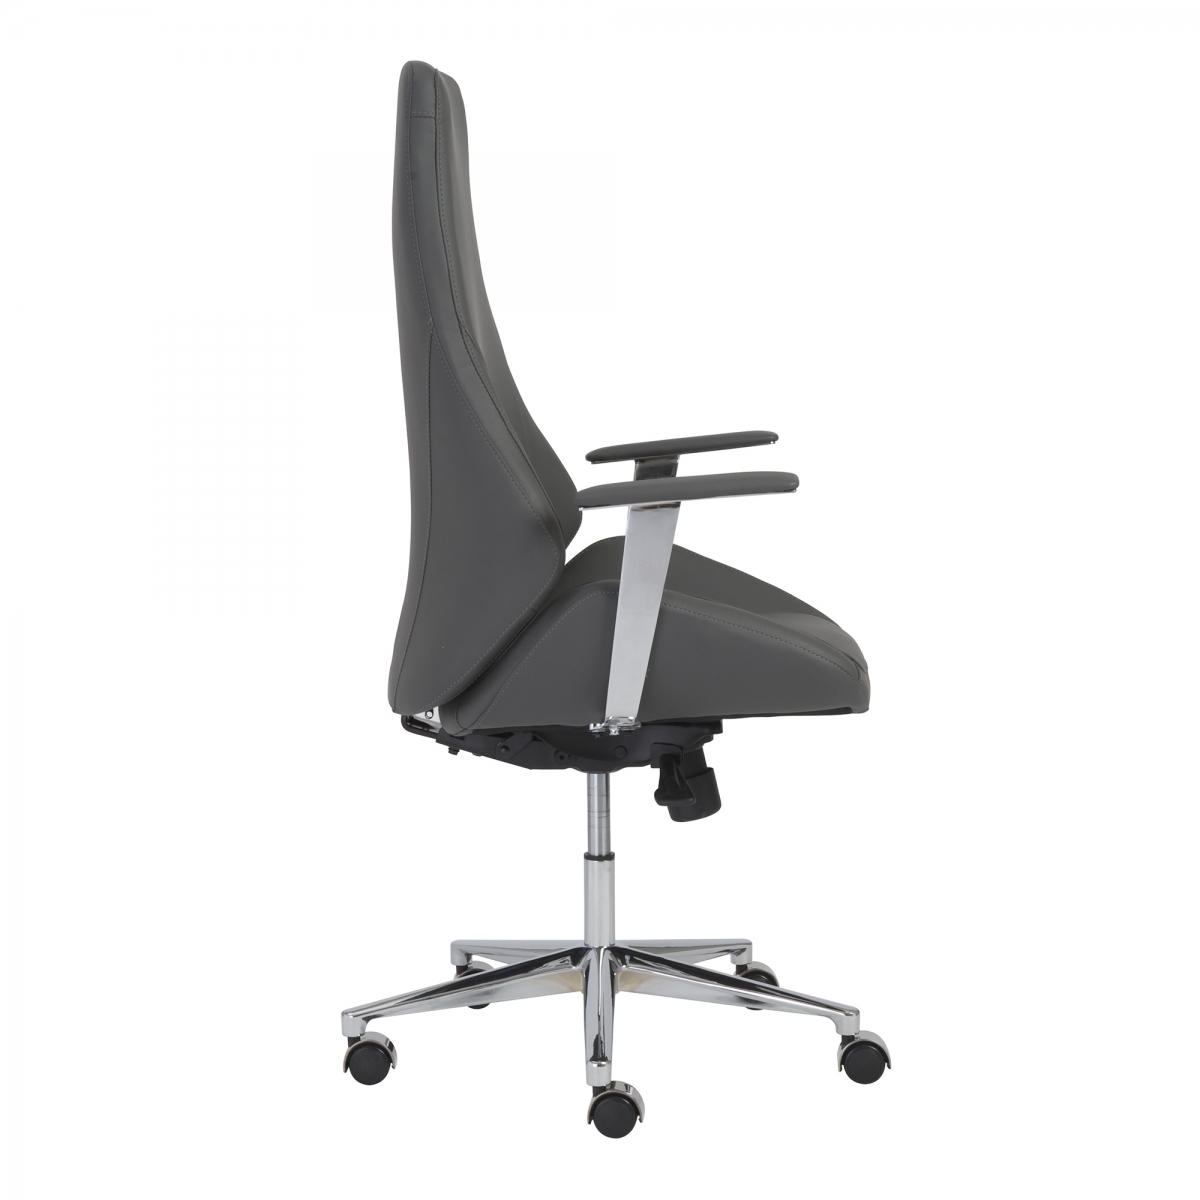 Bergen High Back Executive Chair -In Stock # 1003-S